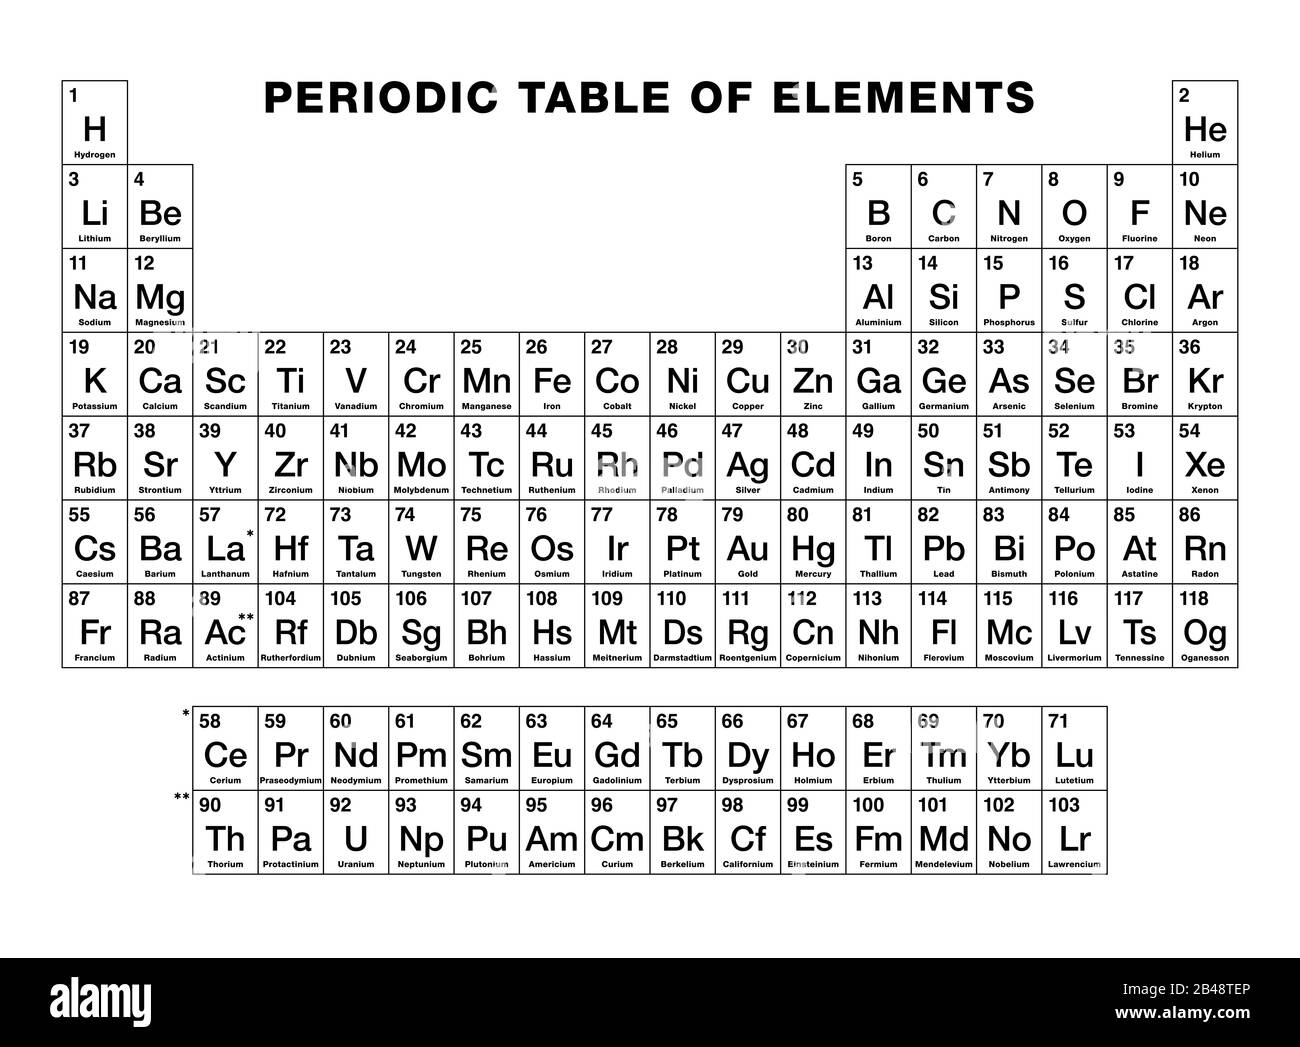 Periodic table of elements, black and white. Periodic table, tabular display of the 118 known chemical elements. With atomic numbers, chemical names. Stock Photo